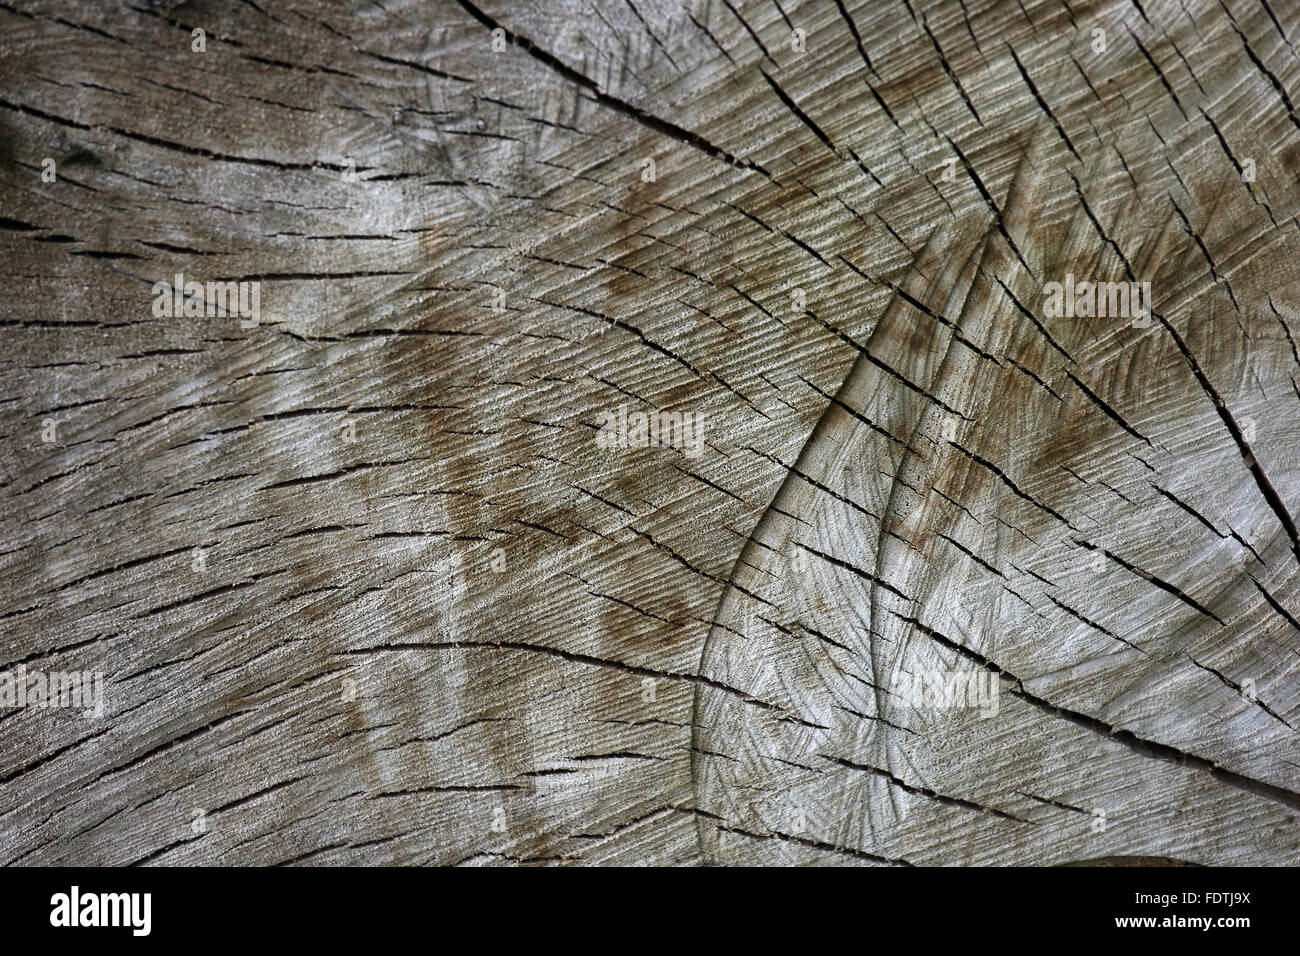 Neustadt (Dosse), Germany, cross-section of a tree trunk Stock Photo